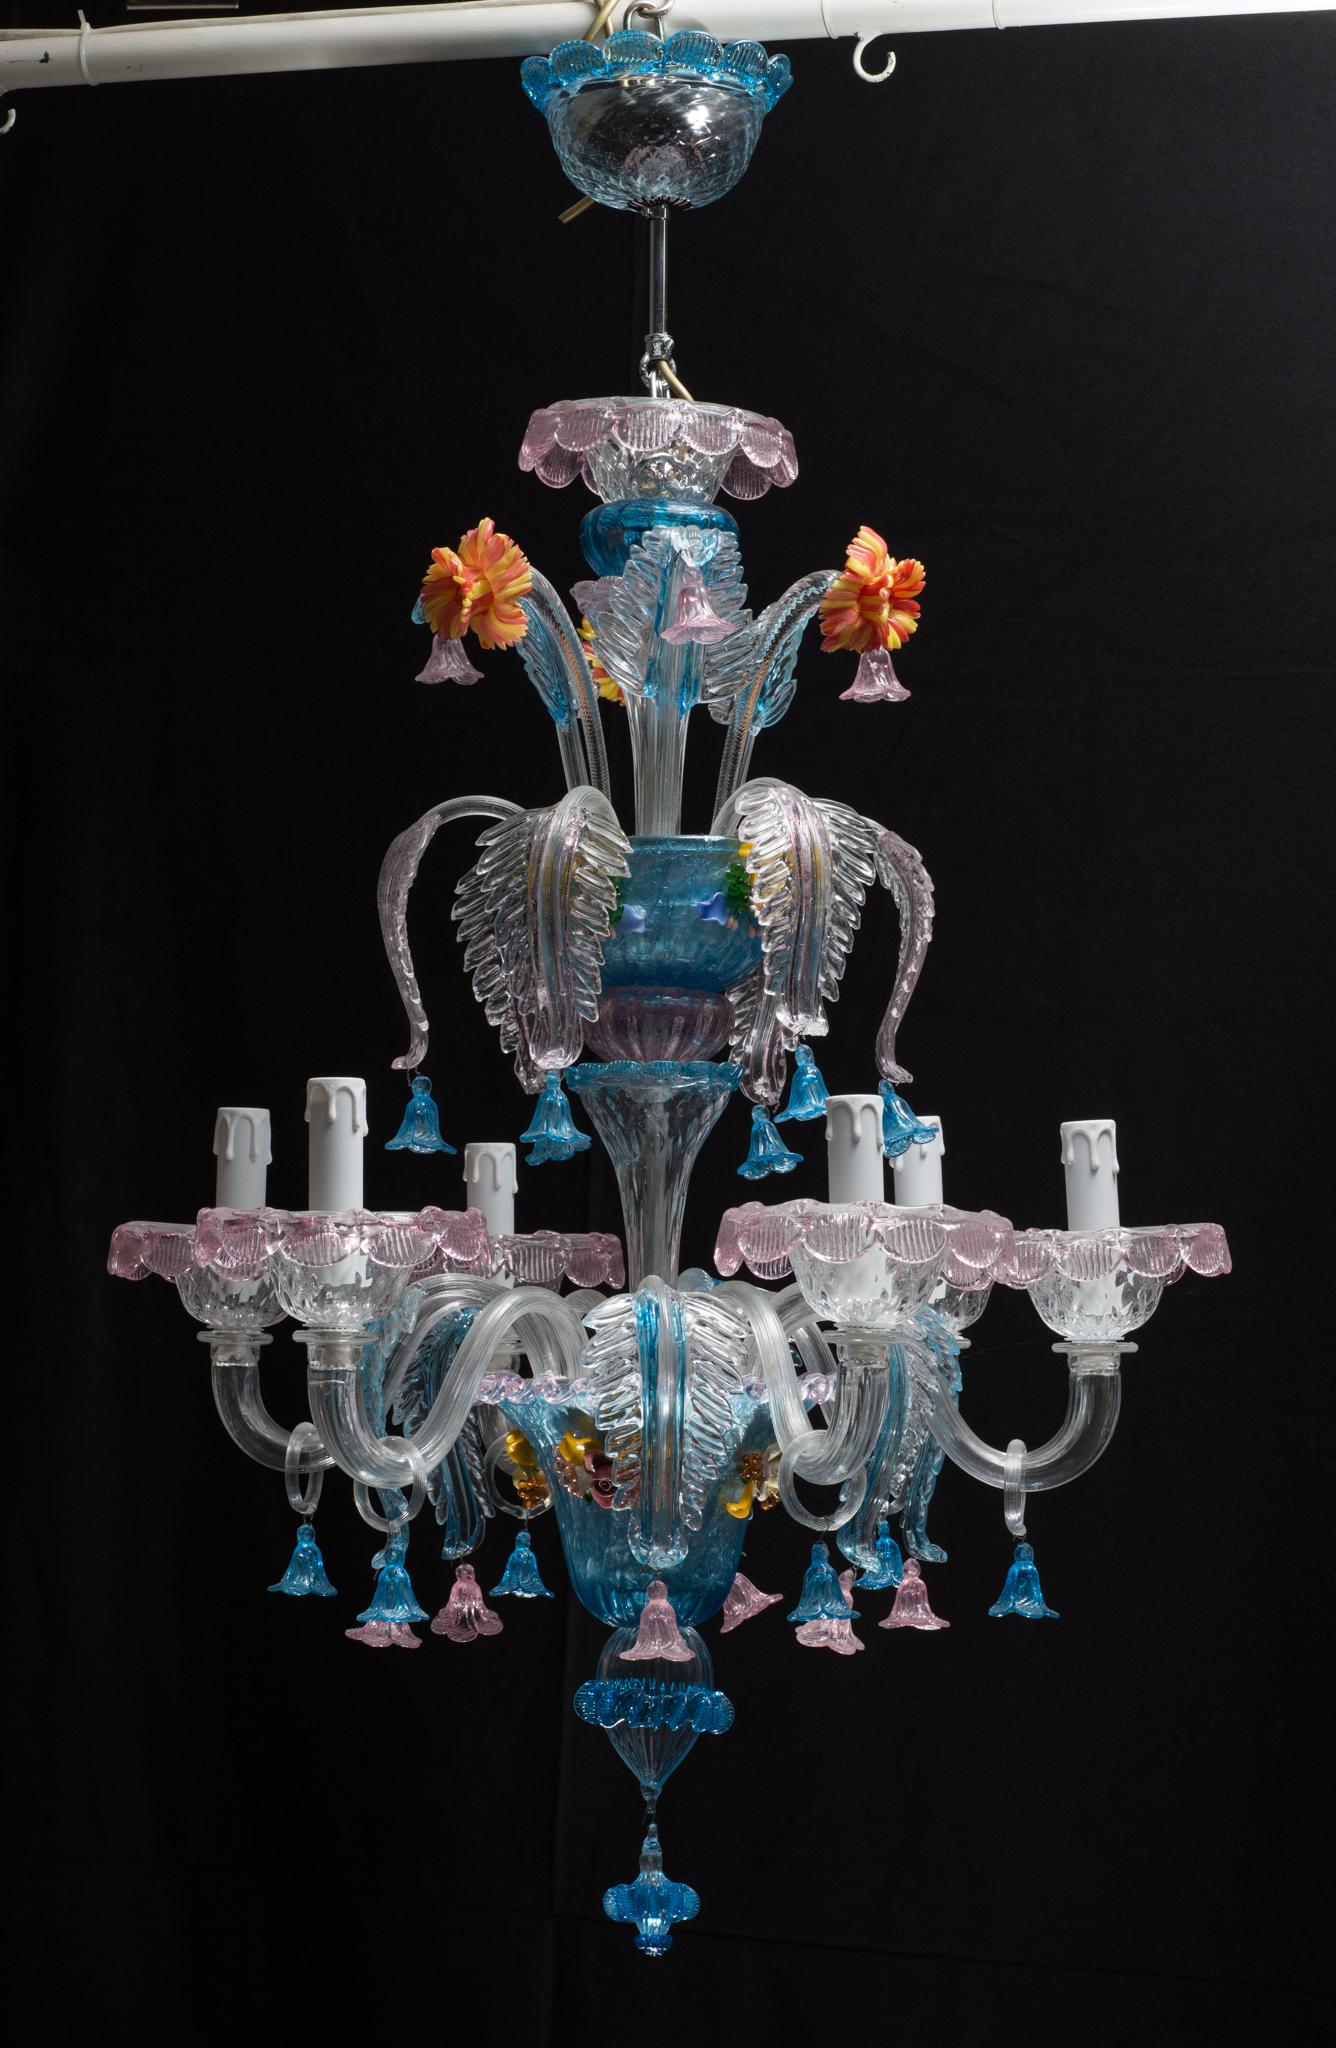 A handcrafted midcentury Italian Murano glass chandelier from Venetia designed by Galliano Ferro.

This colorful light has two levels, and because of that is also called Castelletto which translates to little castle. 
At the first level, you can see